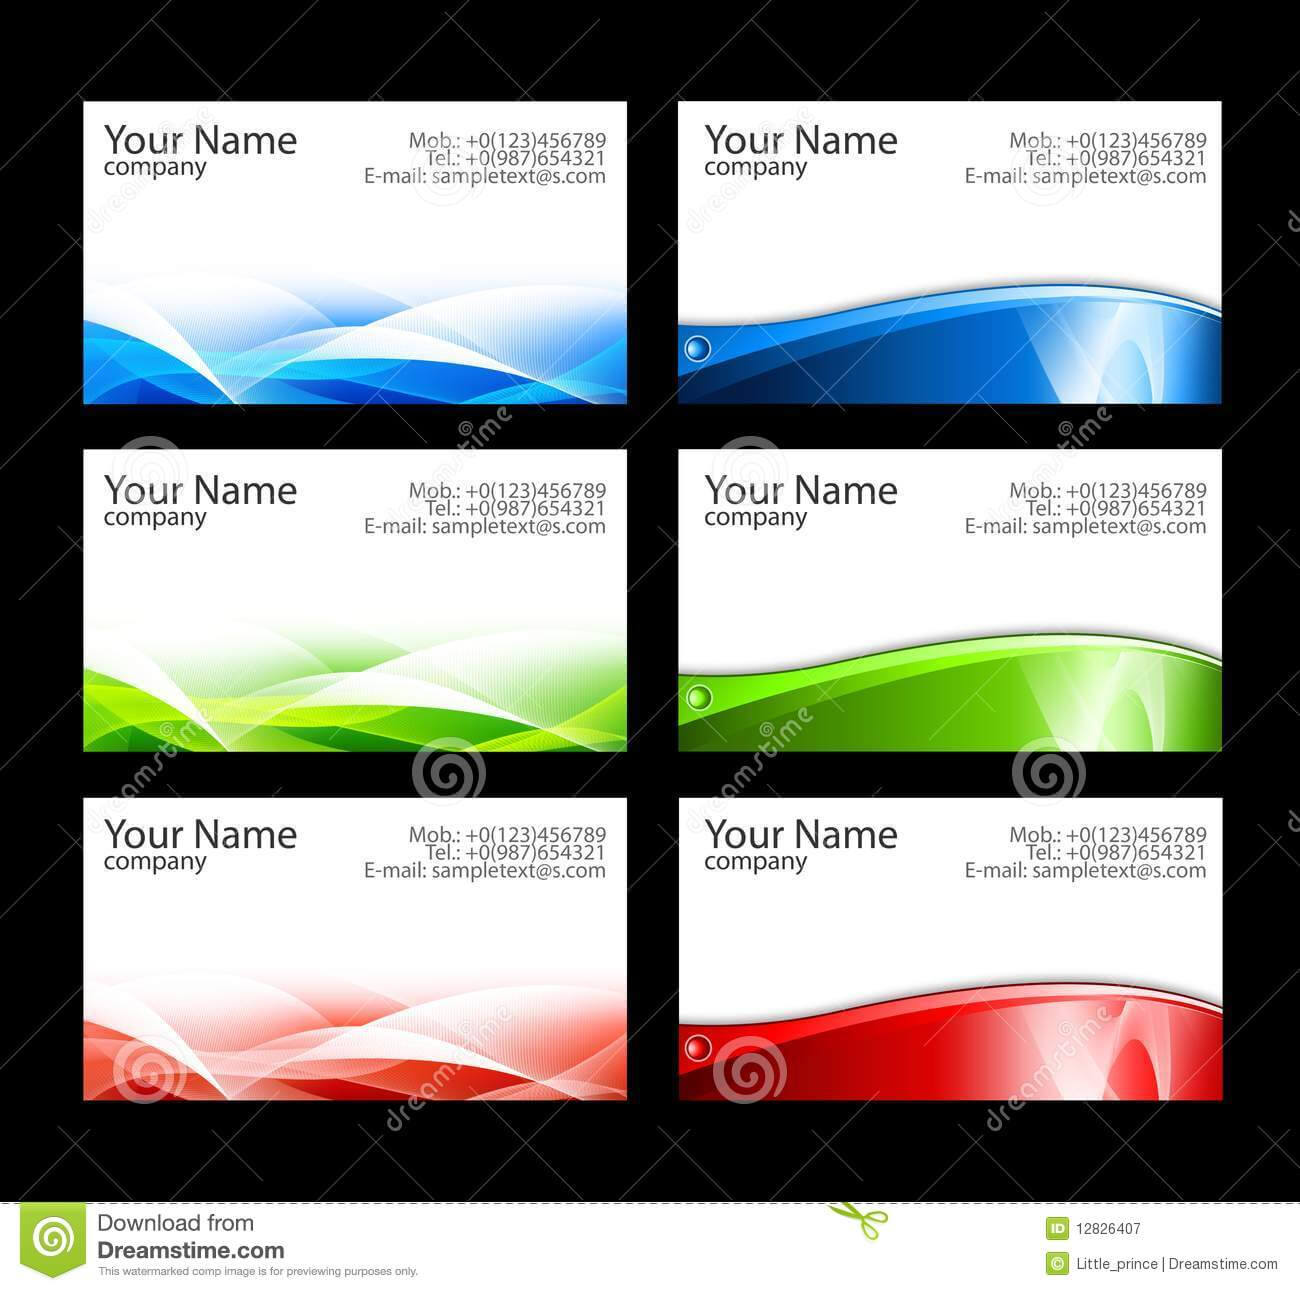 Business Cards Templates Stock Illustration. Illustration Of In Call Card Templates